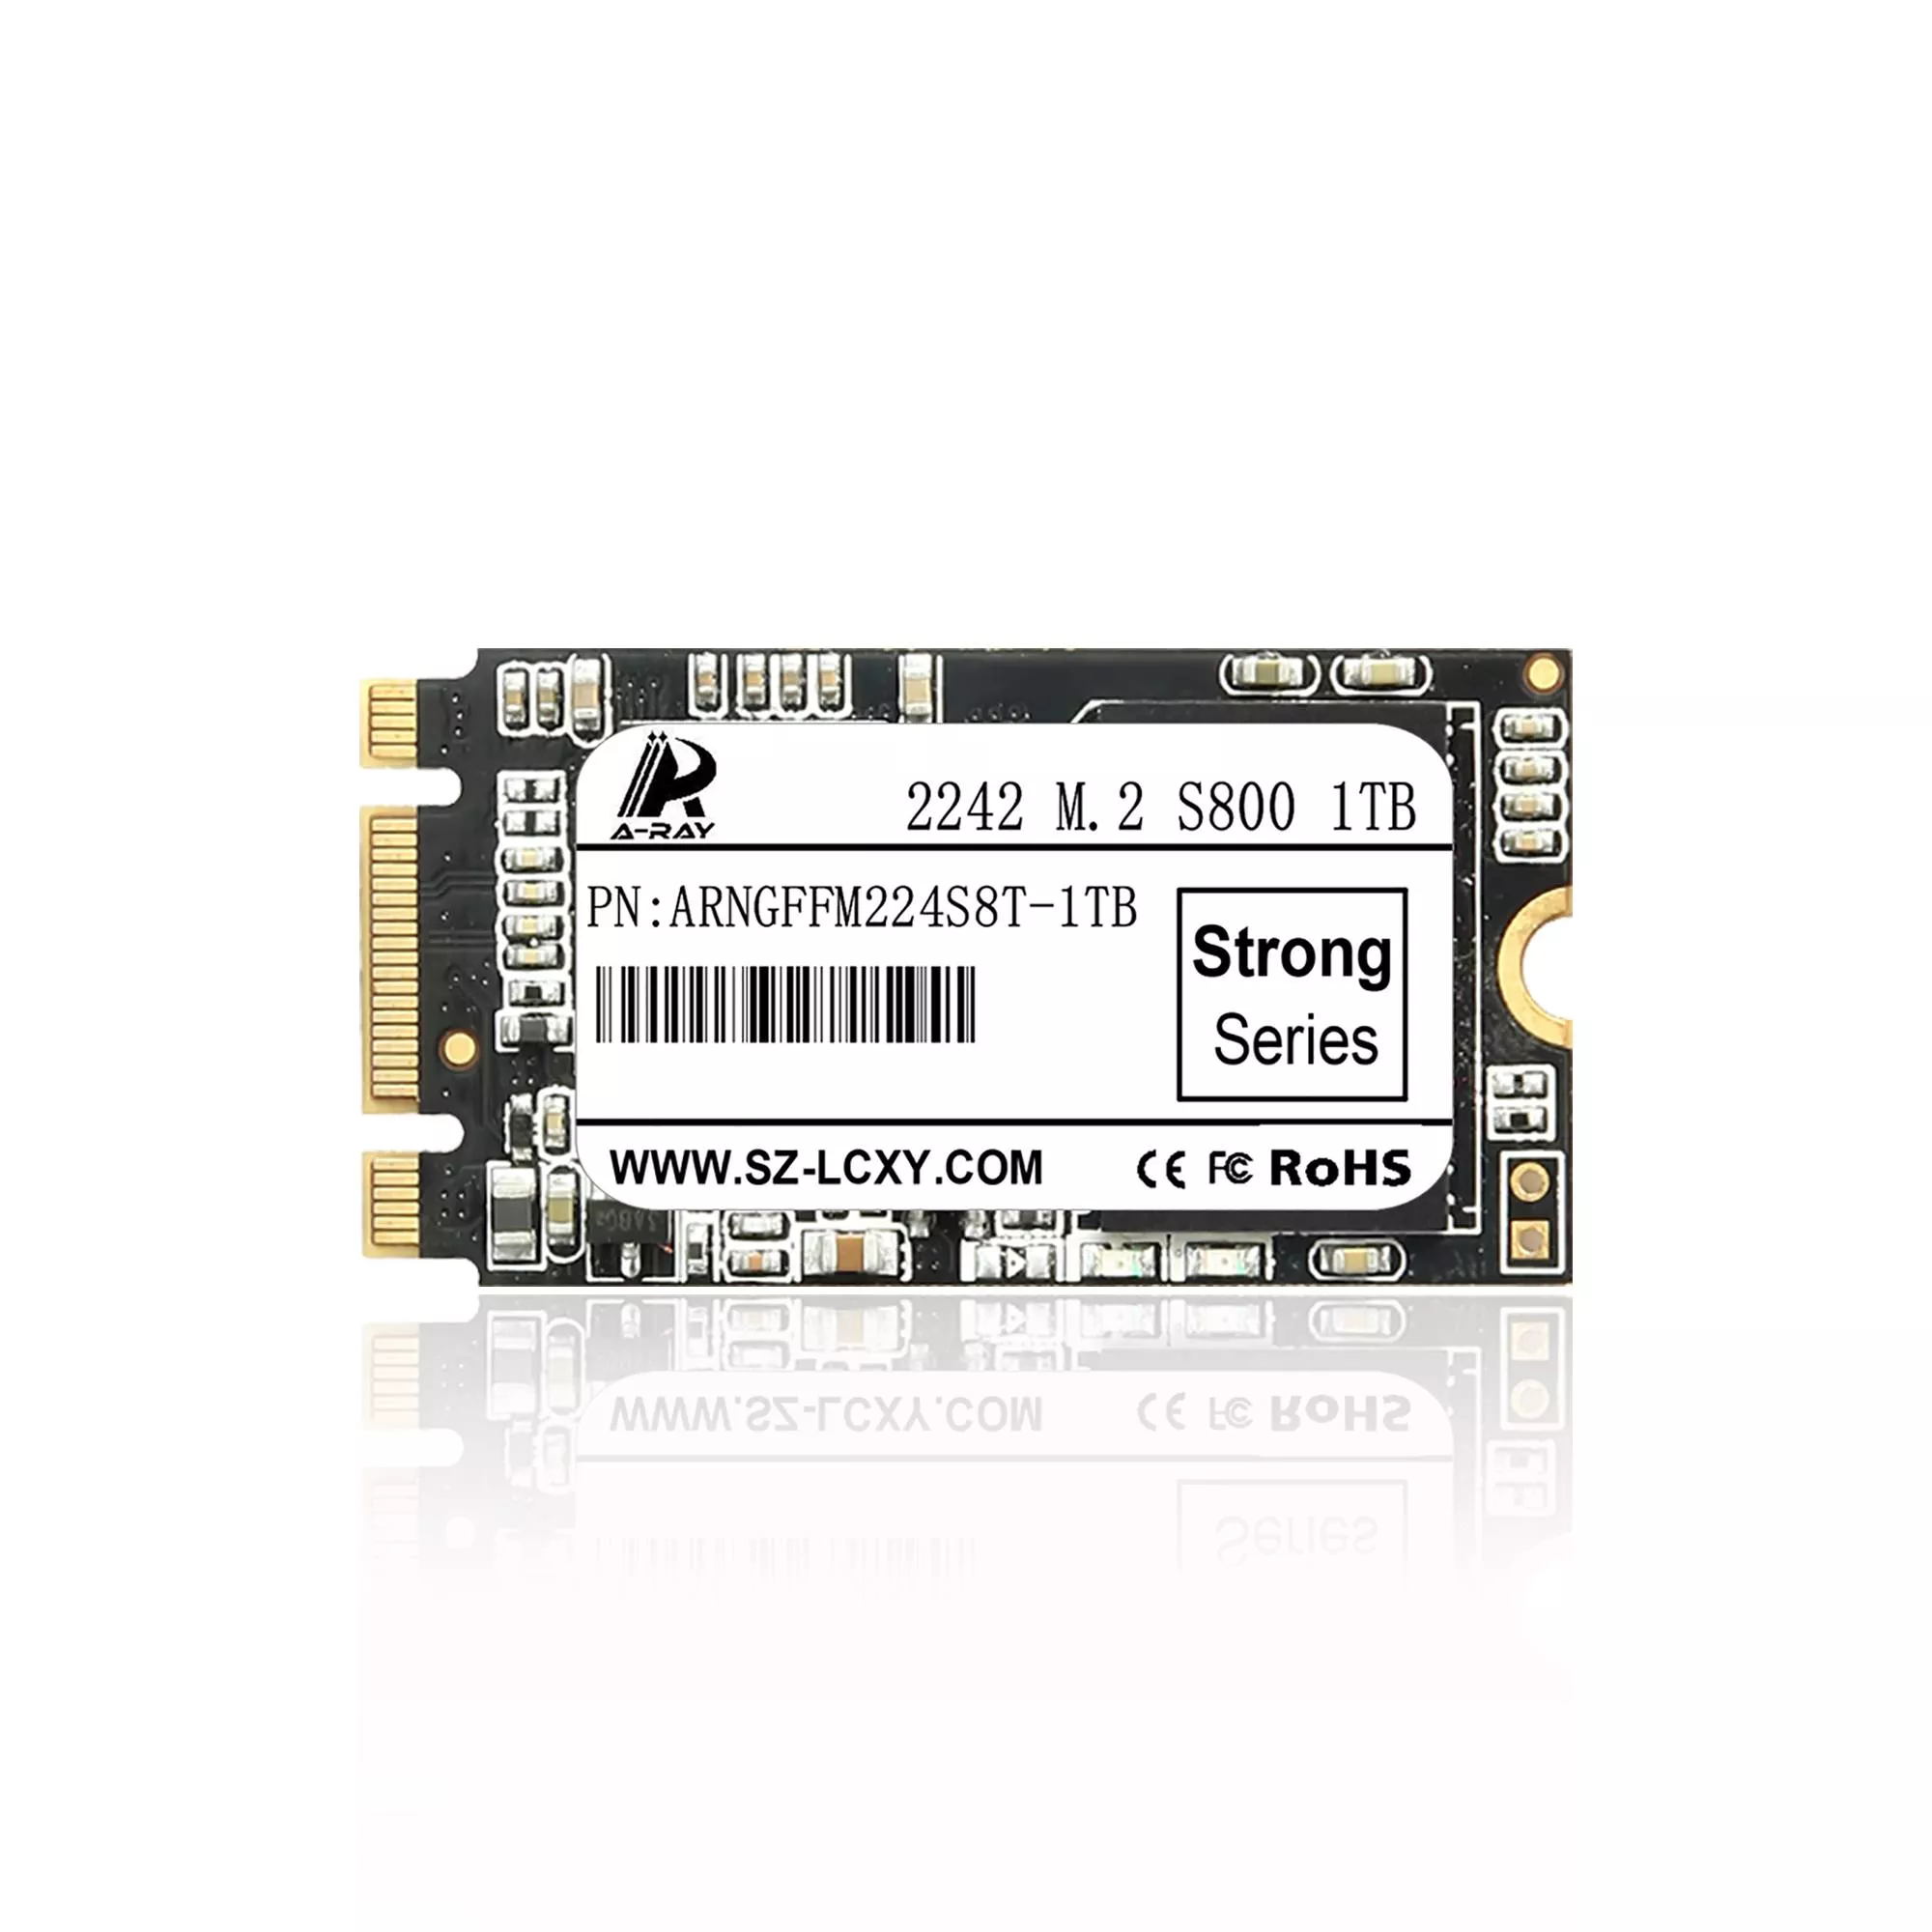 Ổ cứng SSD 1TB A-RAY 2242 NGFF M.2 6GBps S800 Strong Series